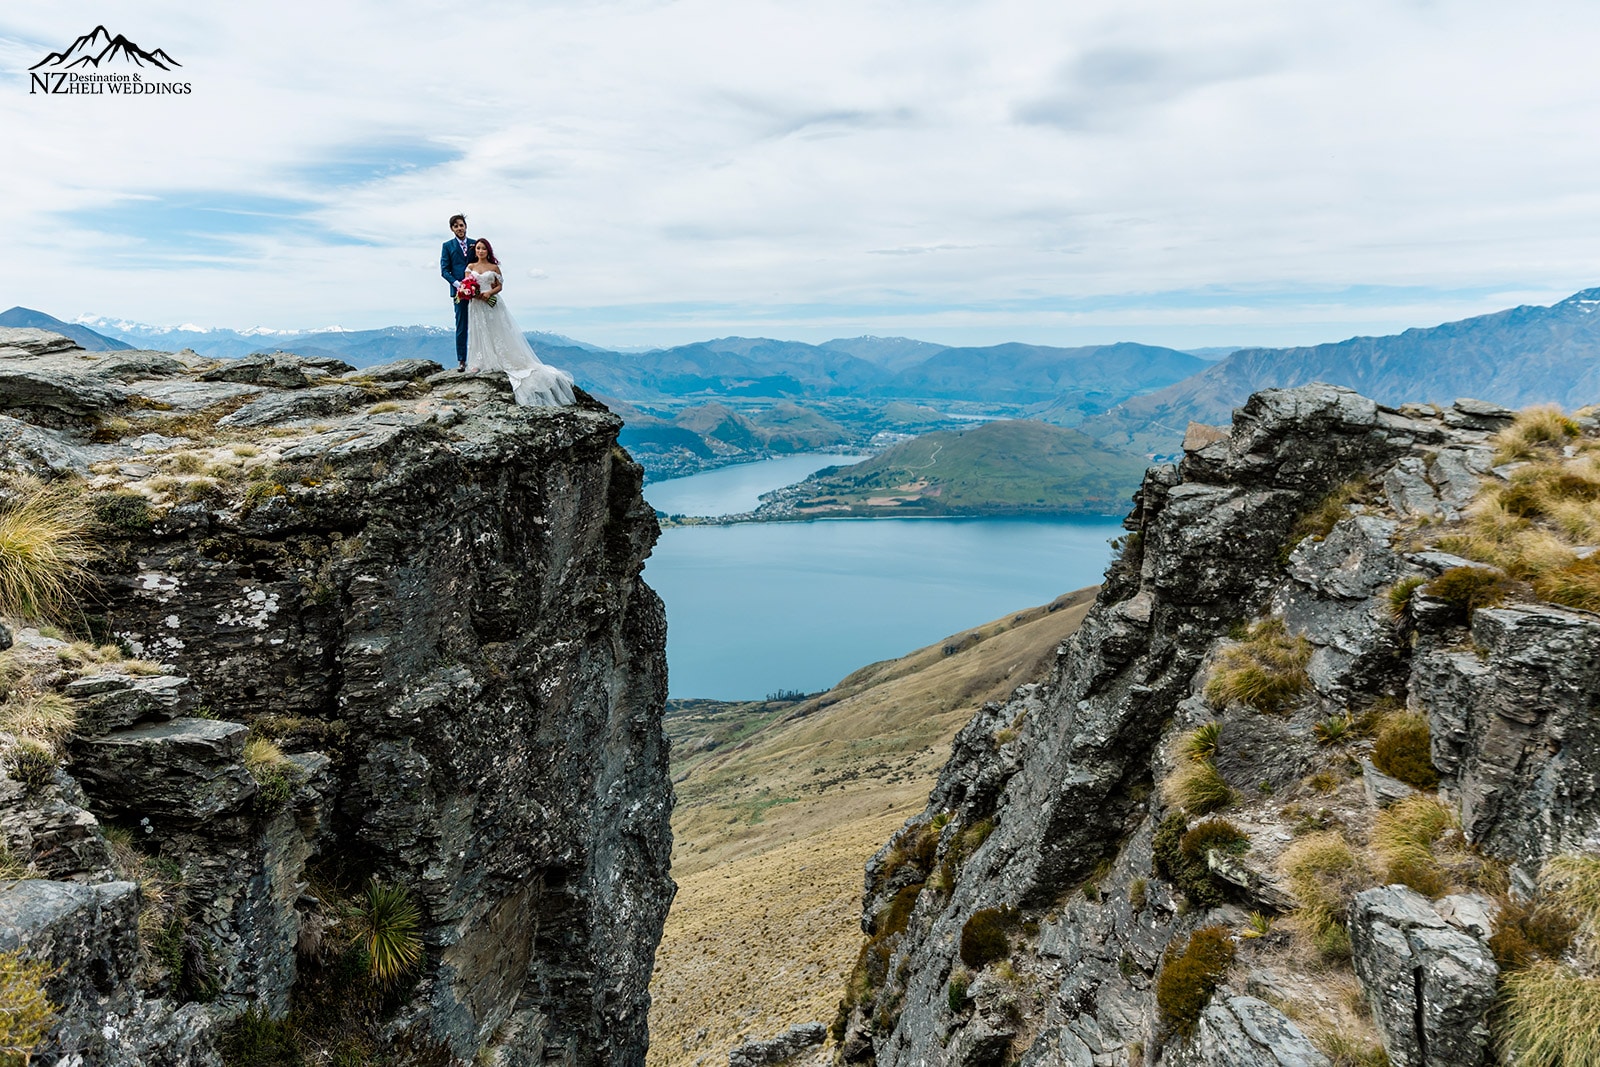 NZ elopement wedding bride with red hair on The Ledge